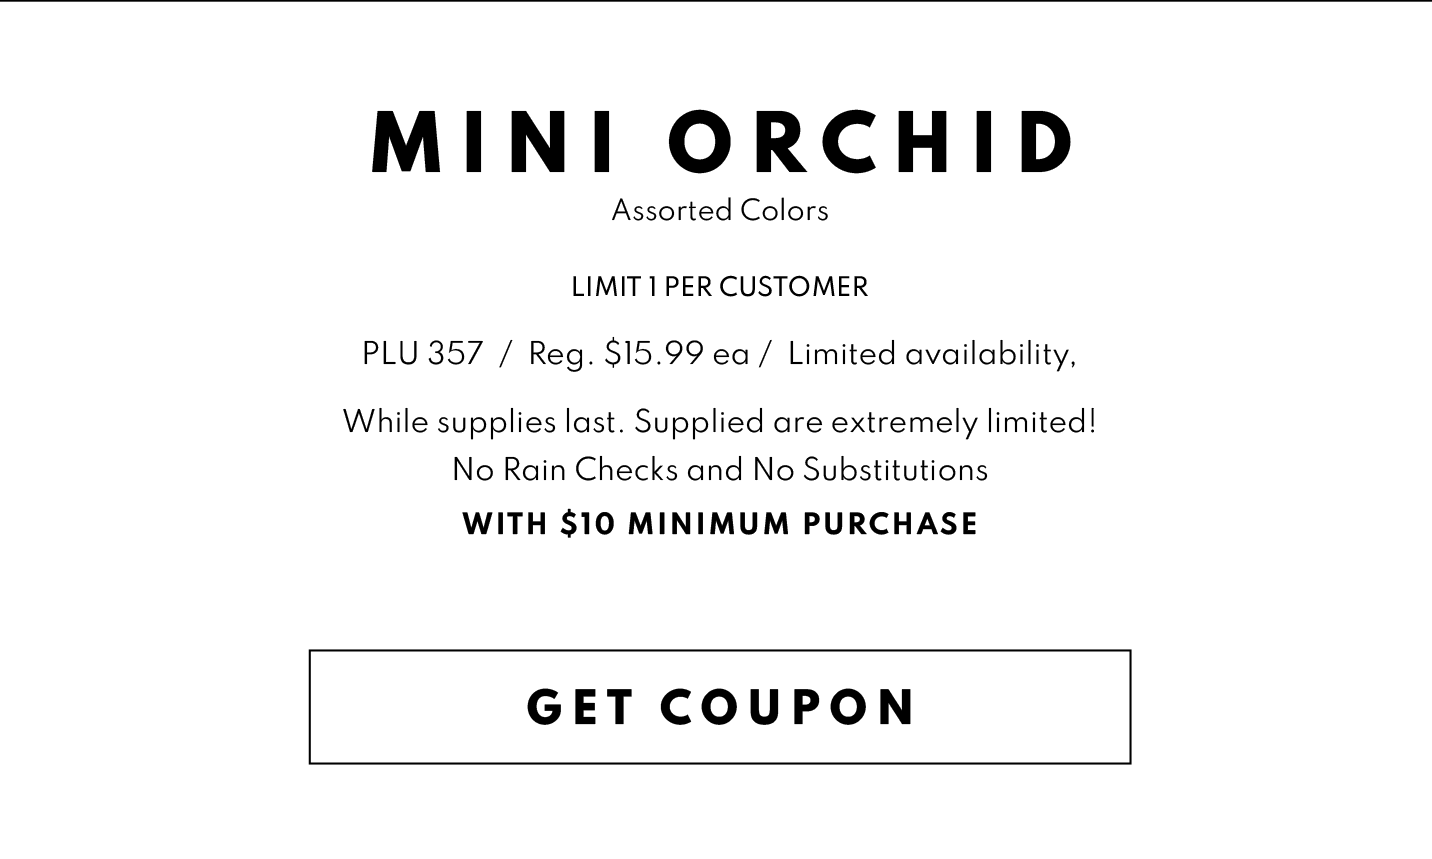 Get Coupon for a BUY ONE GET ONE FREE MINI ORCHID, with $10 Minimum Purchase!